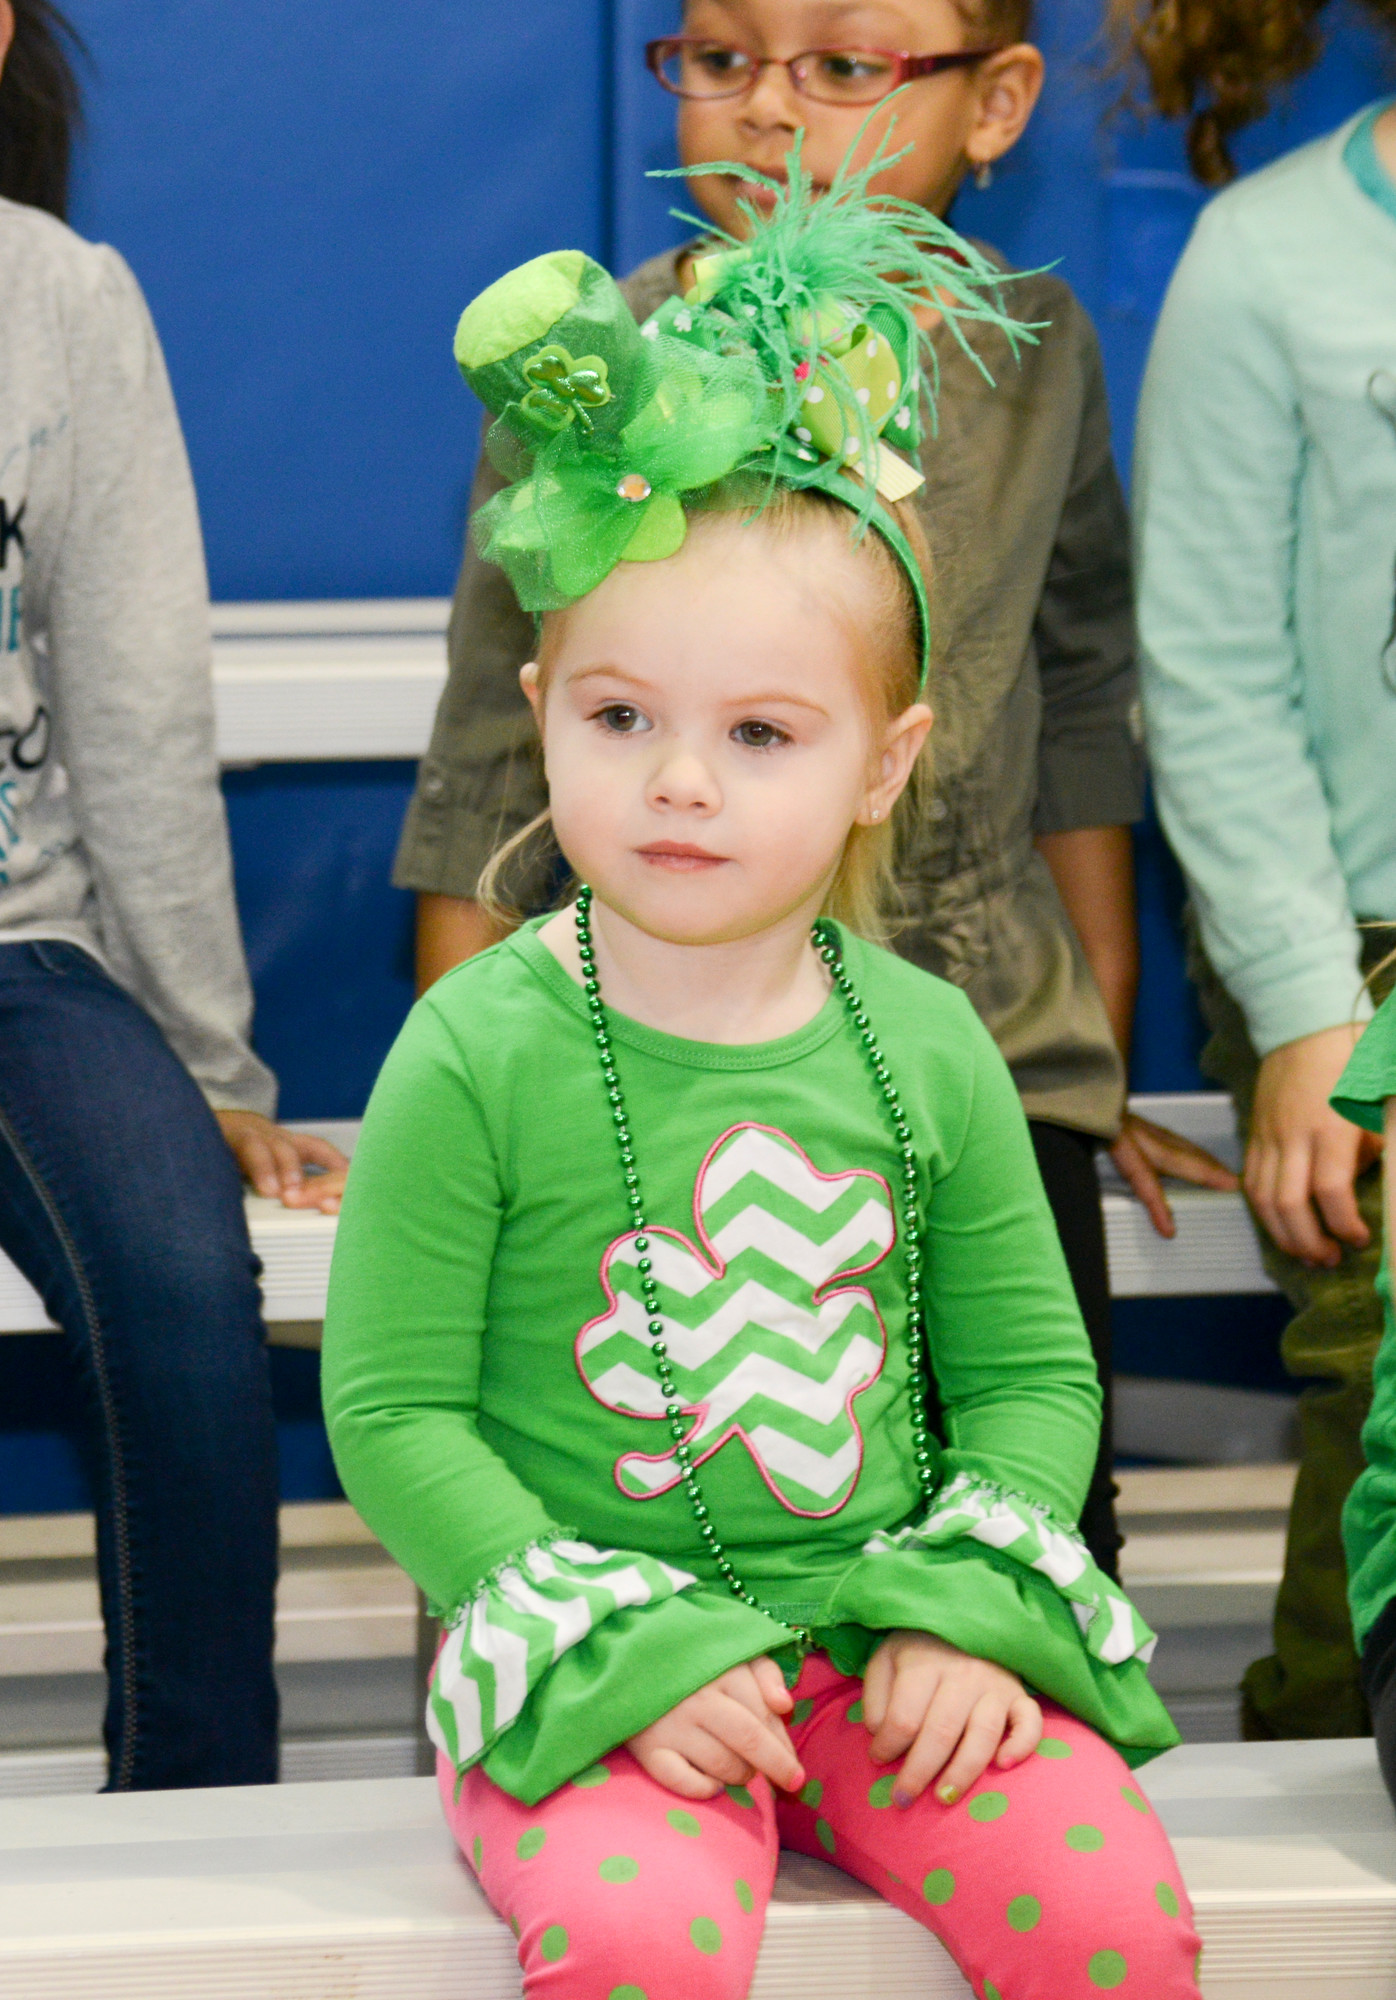 Emma Corcoran watches the bagpiper play for St Patricks day.